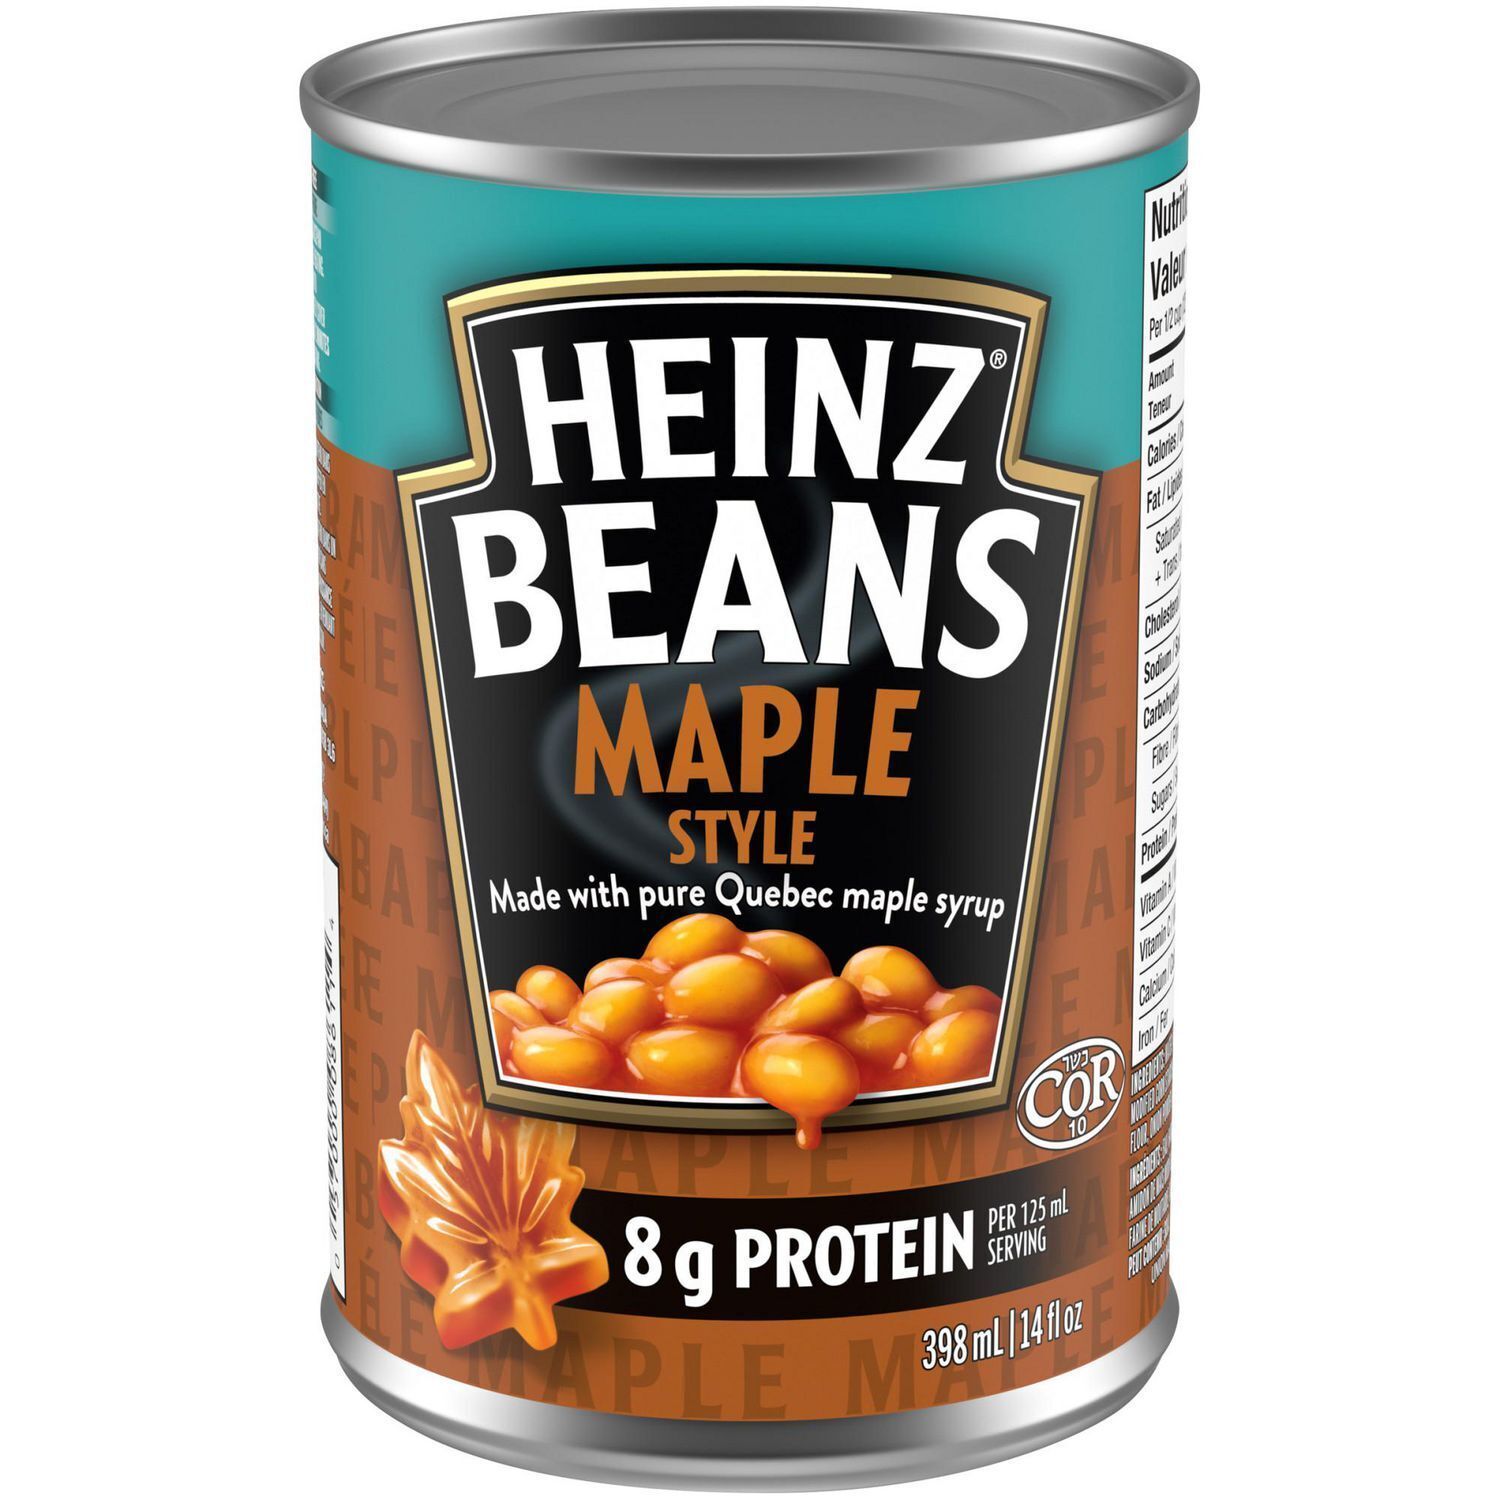 6 Cans of Heinz Maple Style Beans in Quebec Maple Syrup 398ml Each -Free Shipp - $37.74